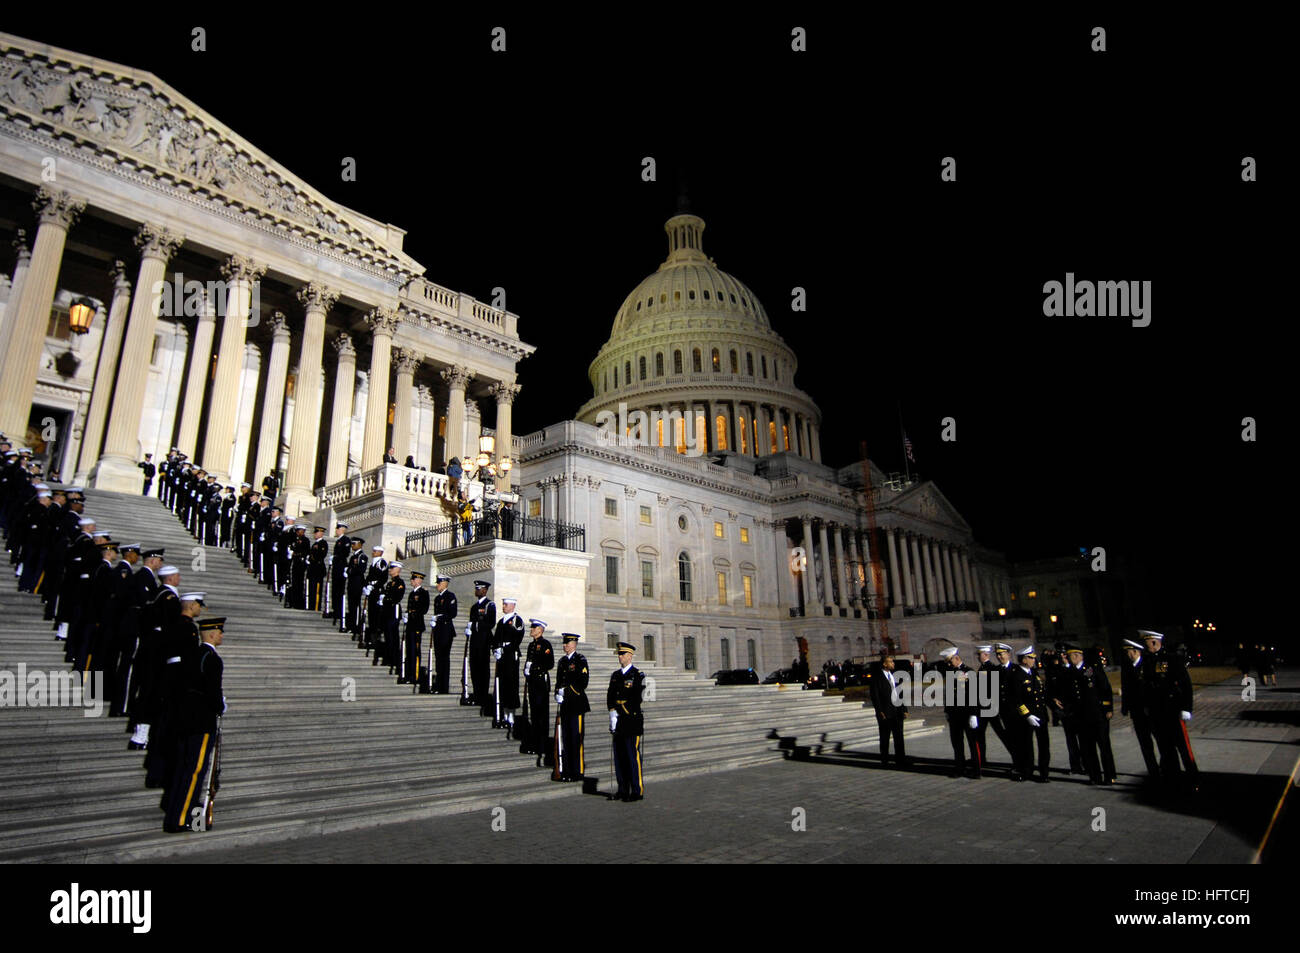 061230-F-0193C-010 Washington, D.C. (Dec. 30, 2006) Ð The Joint Chiefs of Staff prepare for the arrival of the casket containing the body of former U.S. President Gerald Ford at the bottom of the East Steps to the U.S. House of Representatives, at the U.S. Capitol, for a memorial service. Ford died at his home in Rancho Mirage, California, Dec. 26 at the age of 93. A private interment service is scheduled for Jan. 3 at the Gerald R. Ford Presidential museum in Grand Rapids, Mich. Dept. of Defense photo by Staff Sgt. D. Myles Cullen (RELEASED) US Navy 061230-F-0193C-010 The Joint Chiefs of Staf Stock Photo